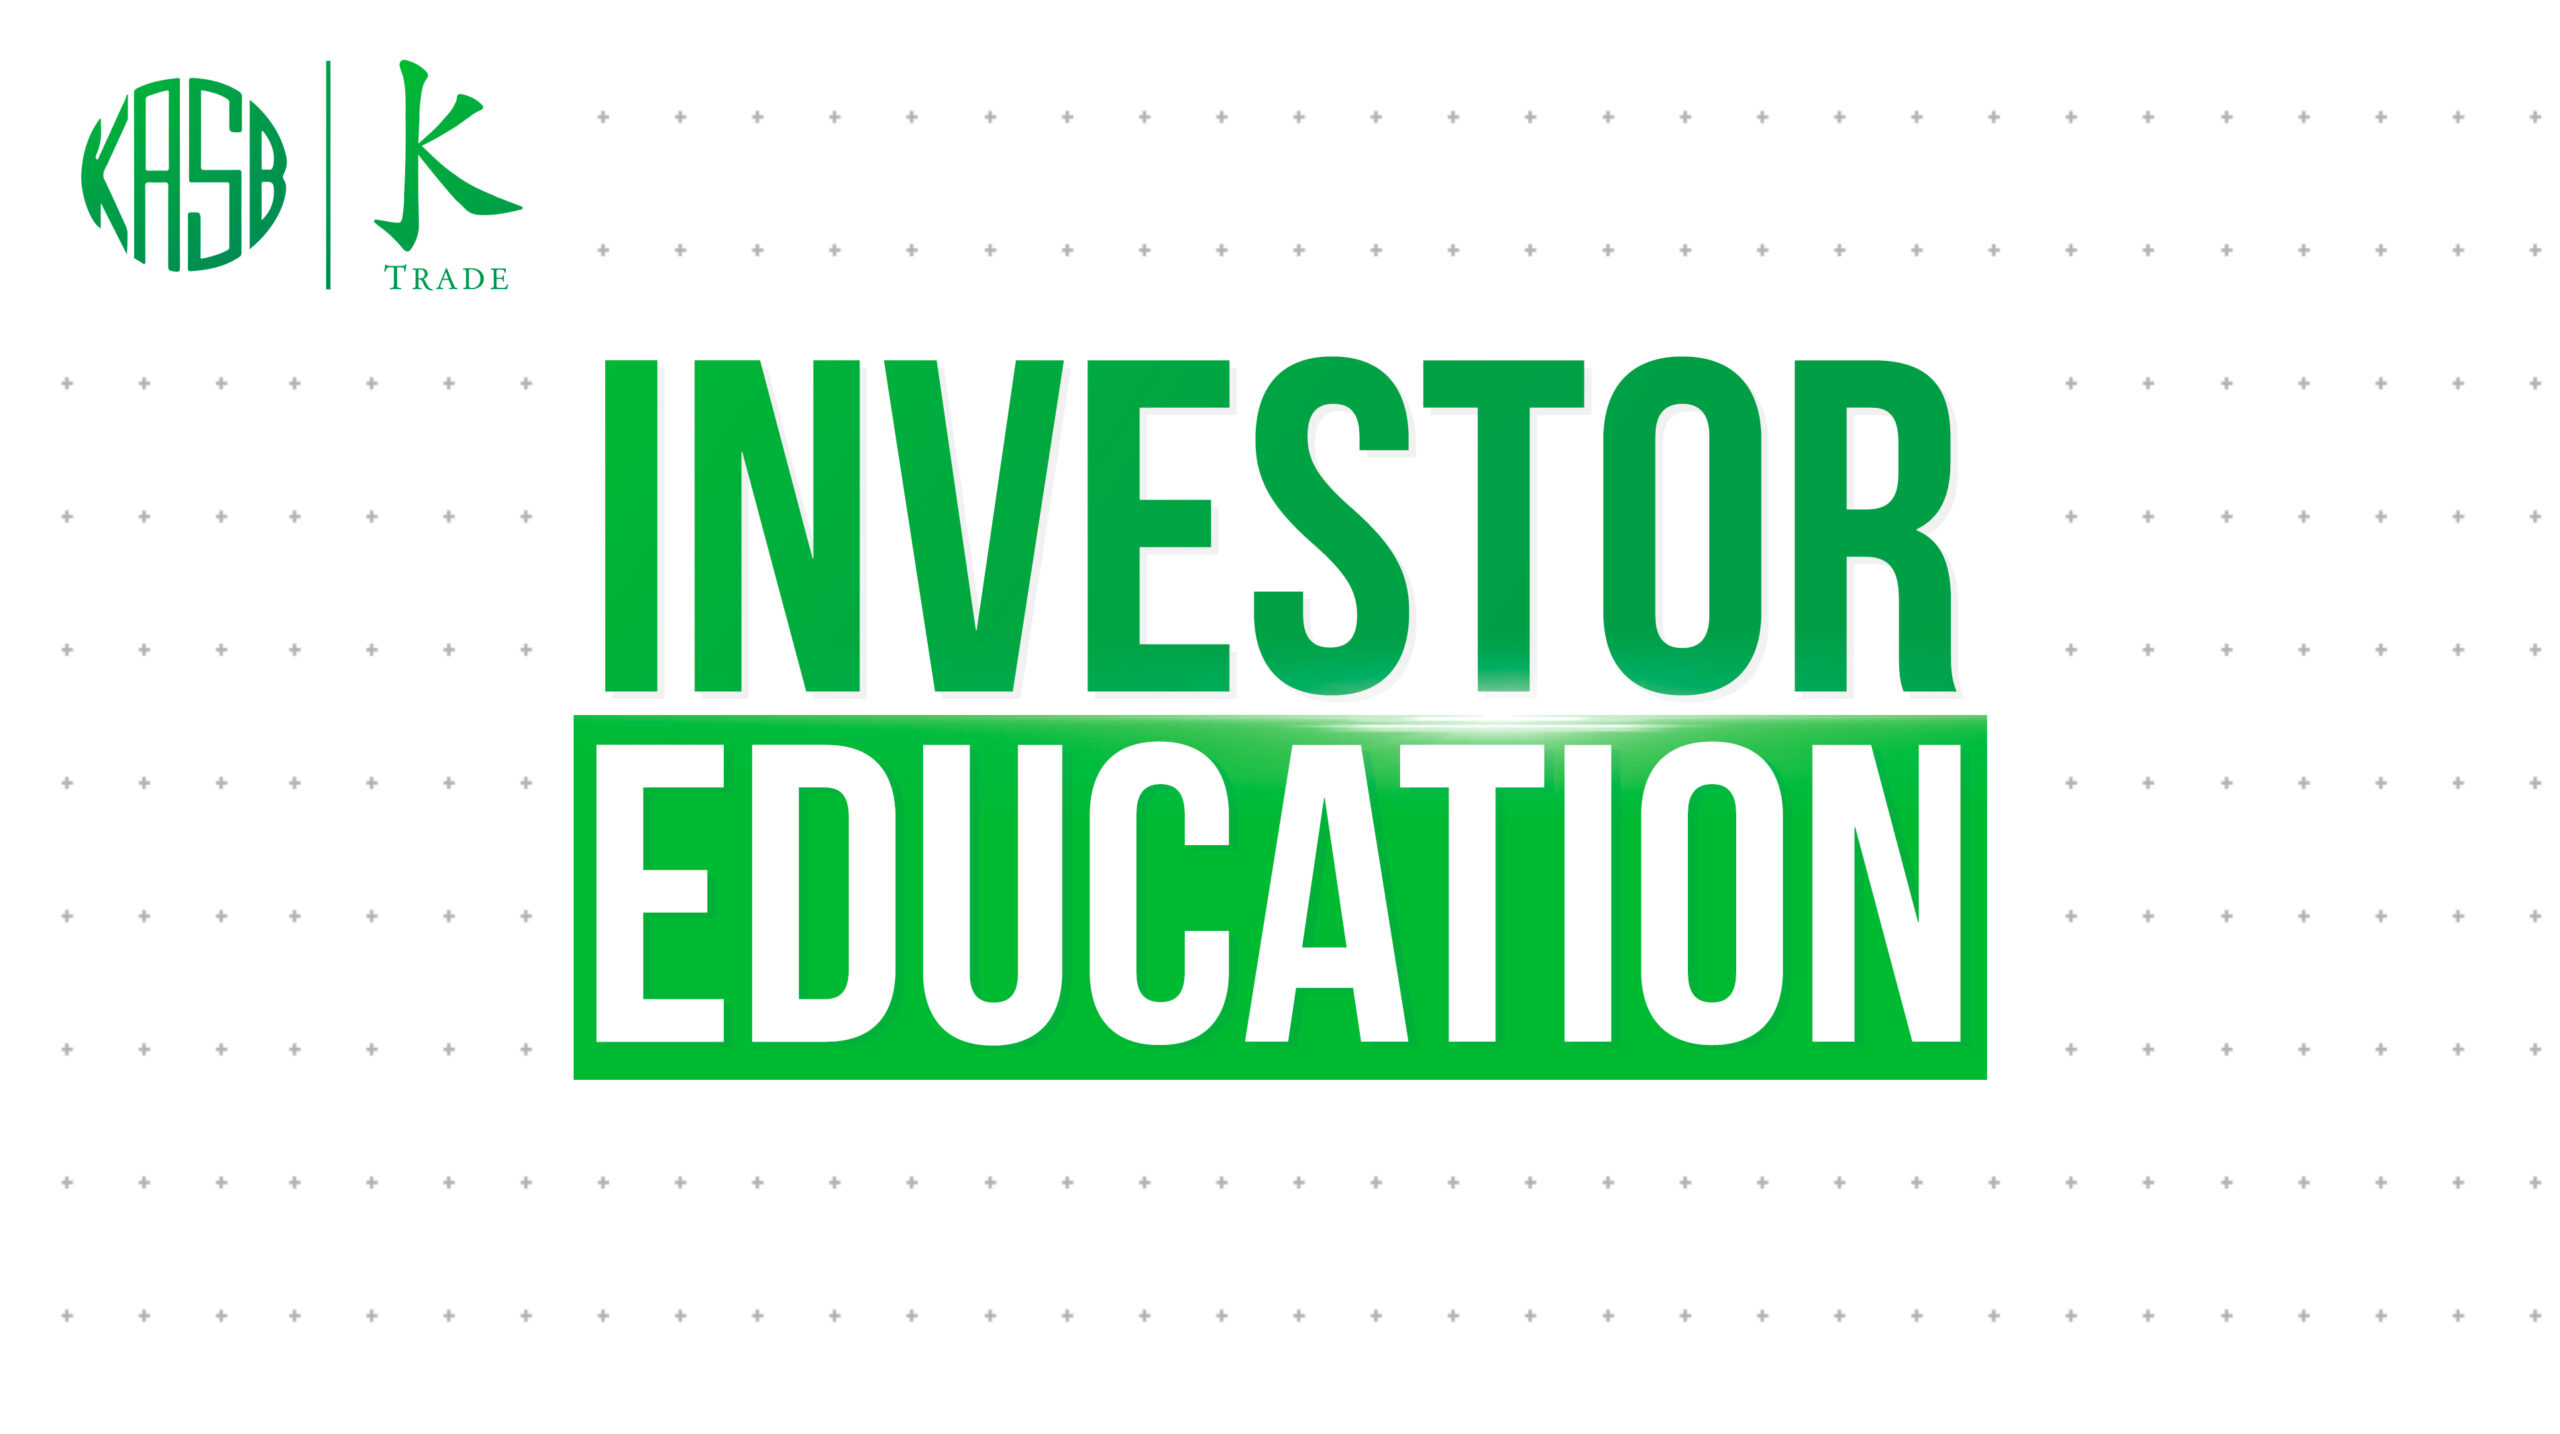 Investor Education scaled